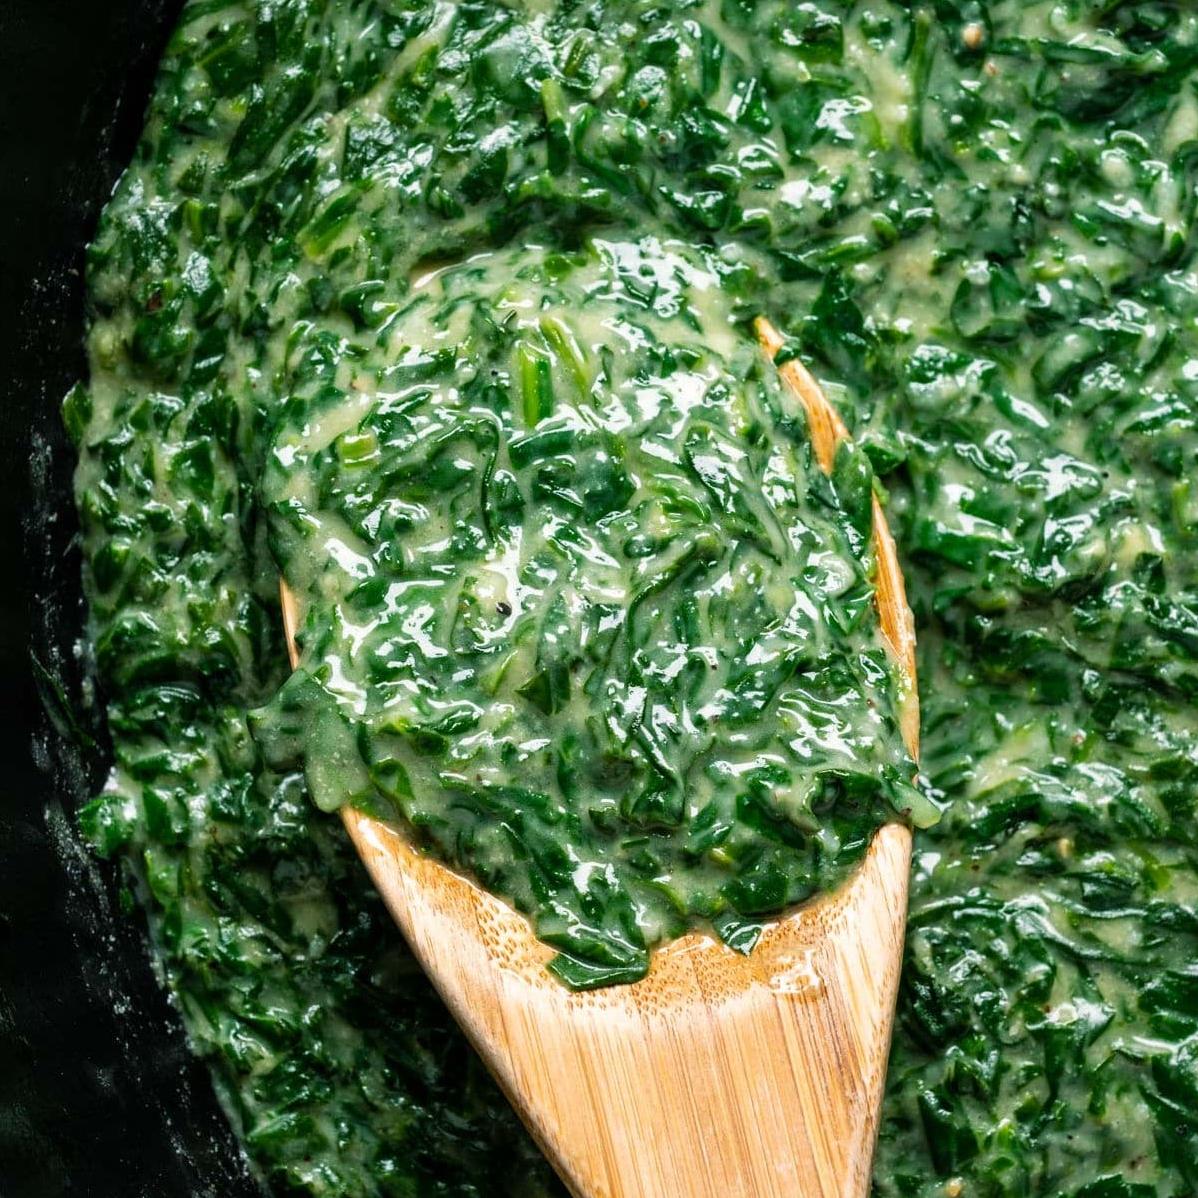  You won't even miss the dairy in this delicious creamed spinach.